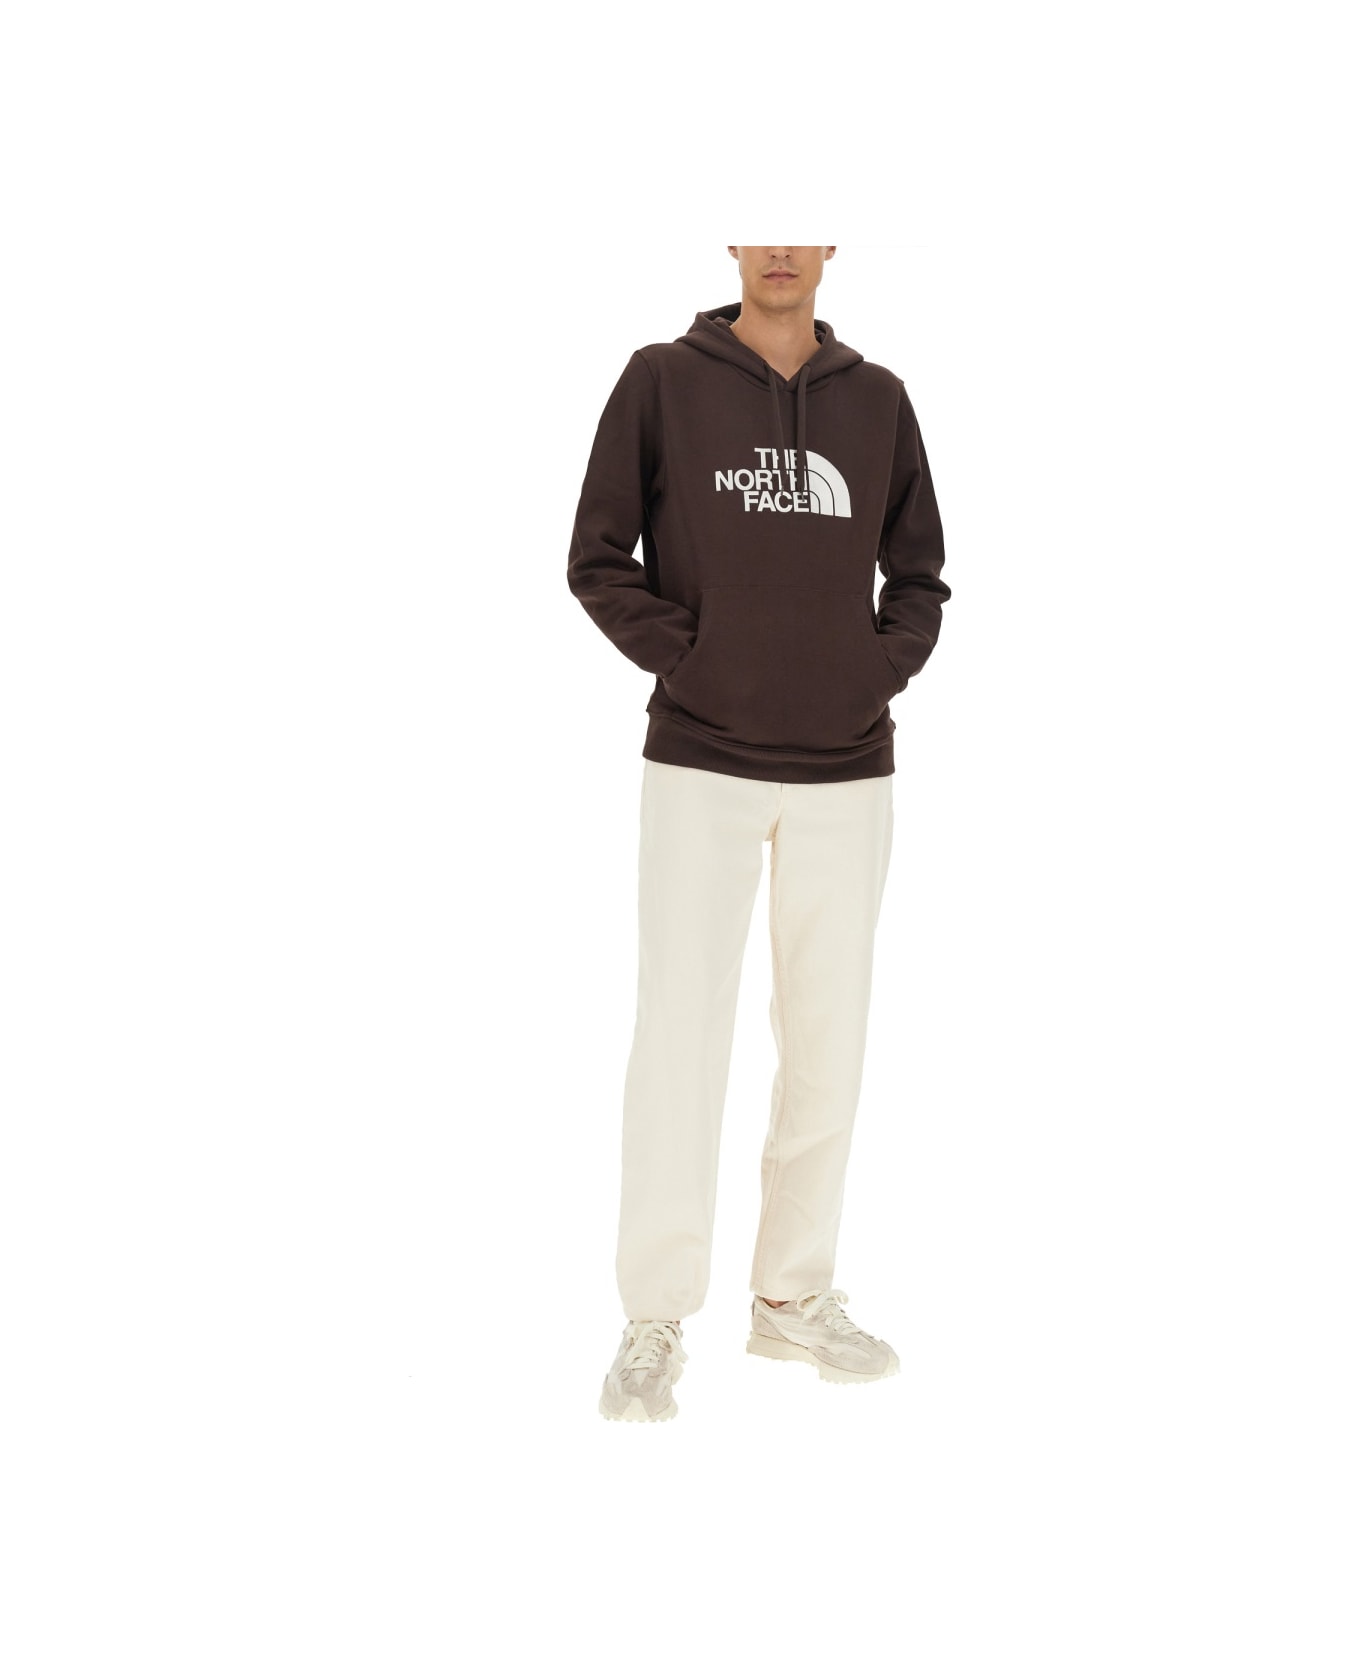 The North Face Sweatshirt With Logo - BROWN